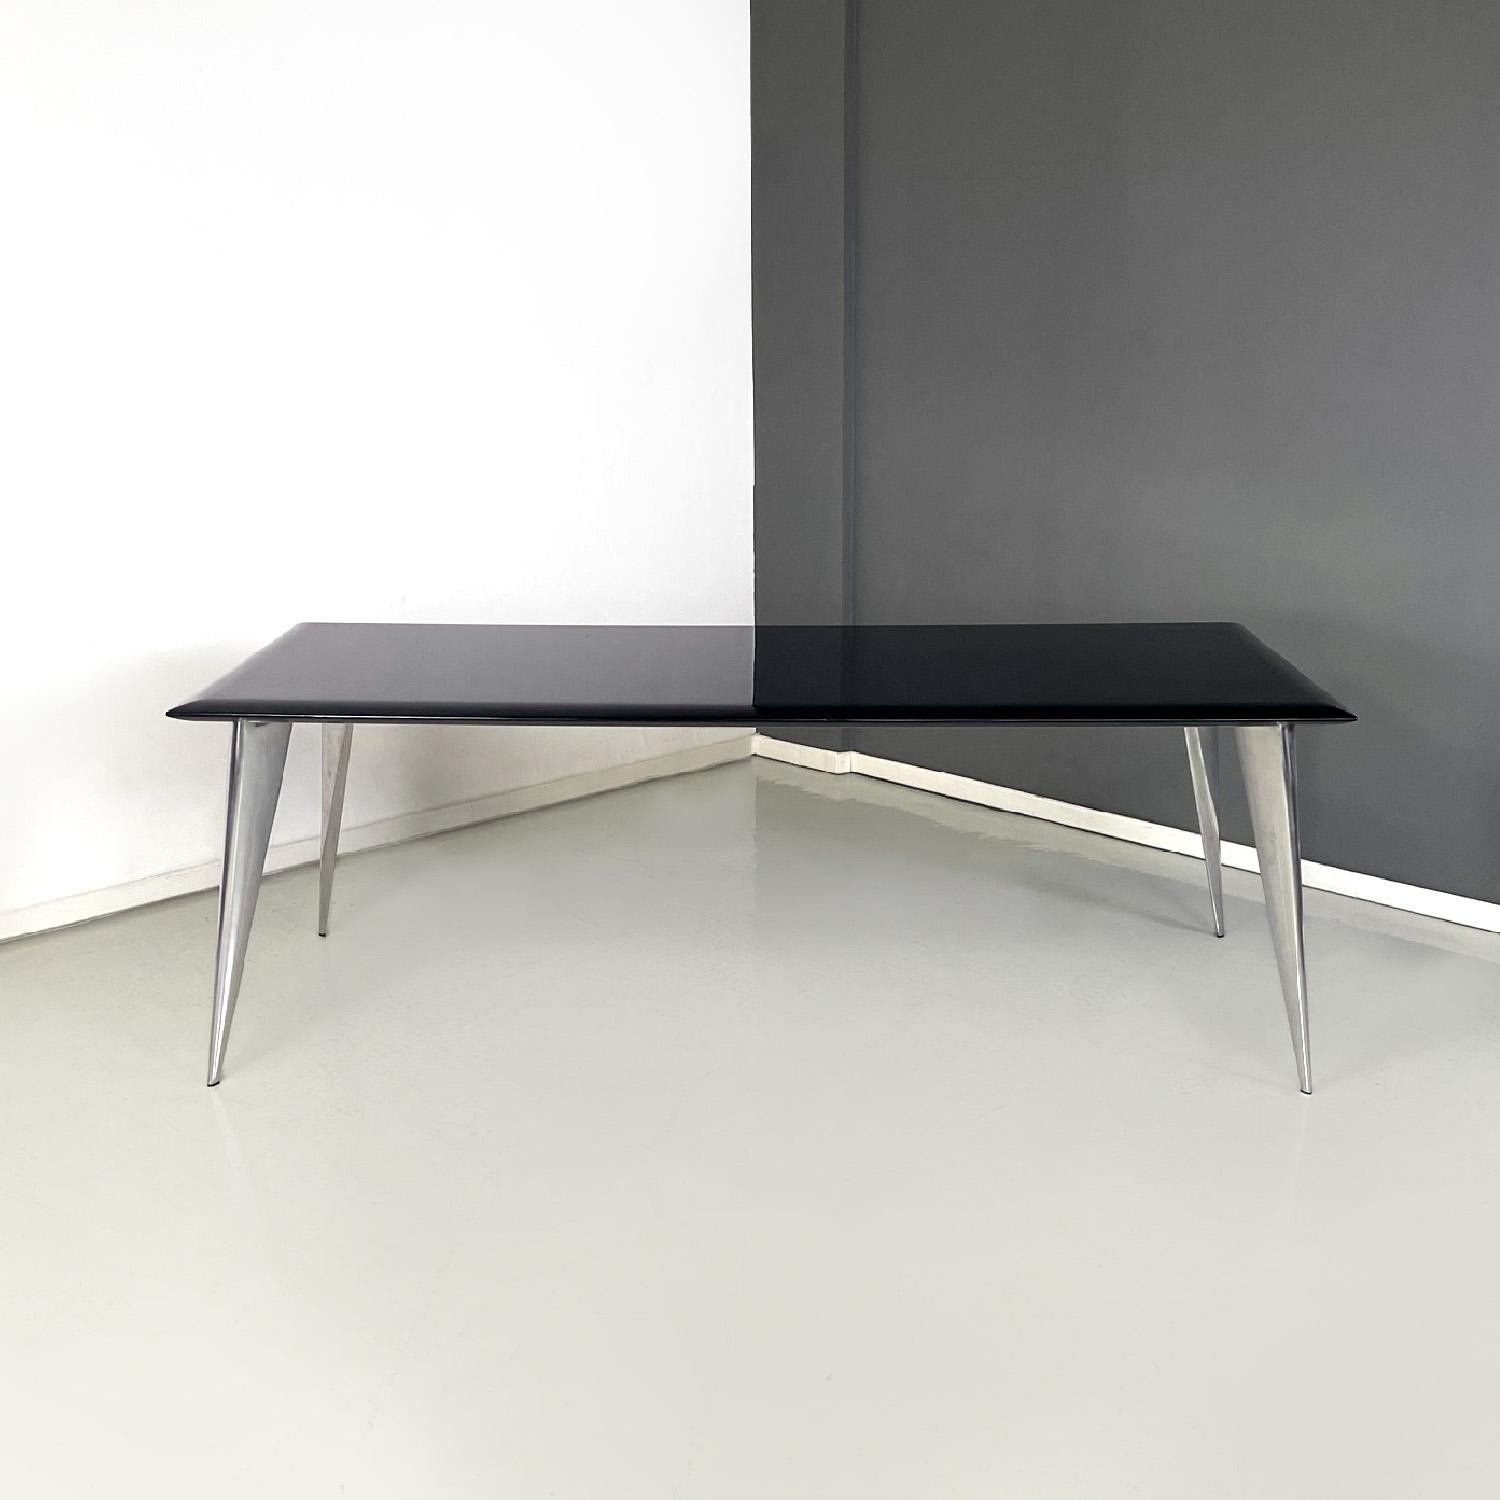 Italian modern black dining table M by Philippe Starck for Driade Aleph, 1980s
Dining table mod. M rectangular in shape. The top is in glossy black painted wood with mirror-like shaping in the lower and upper parts along the entire perimeter. The